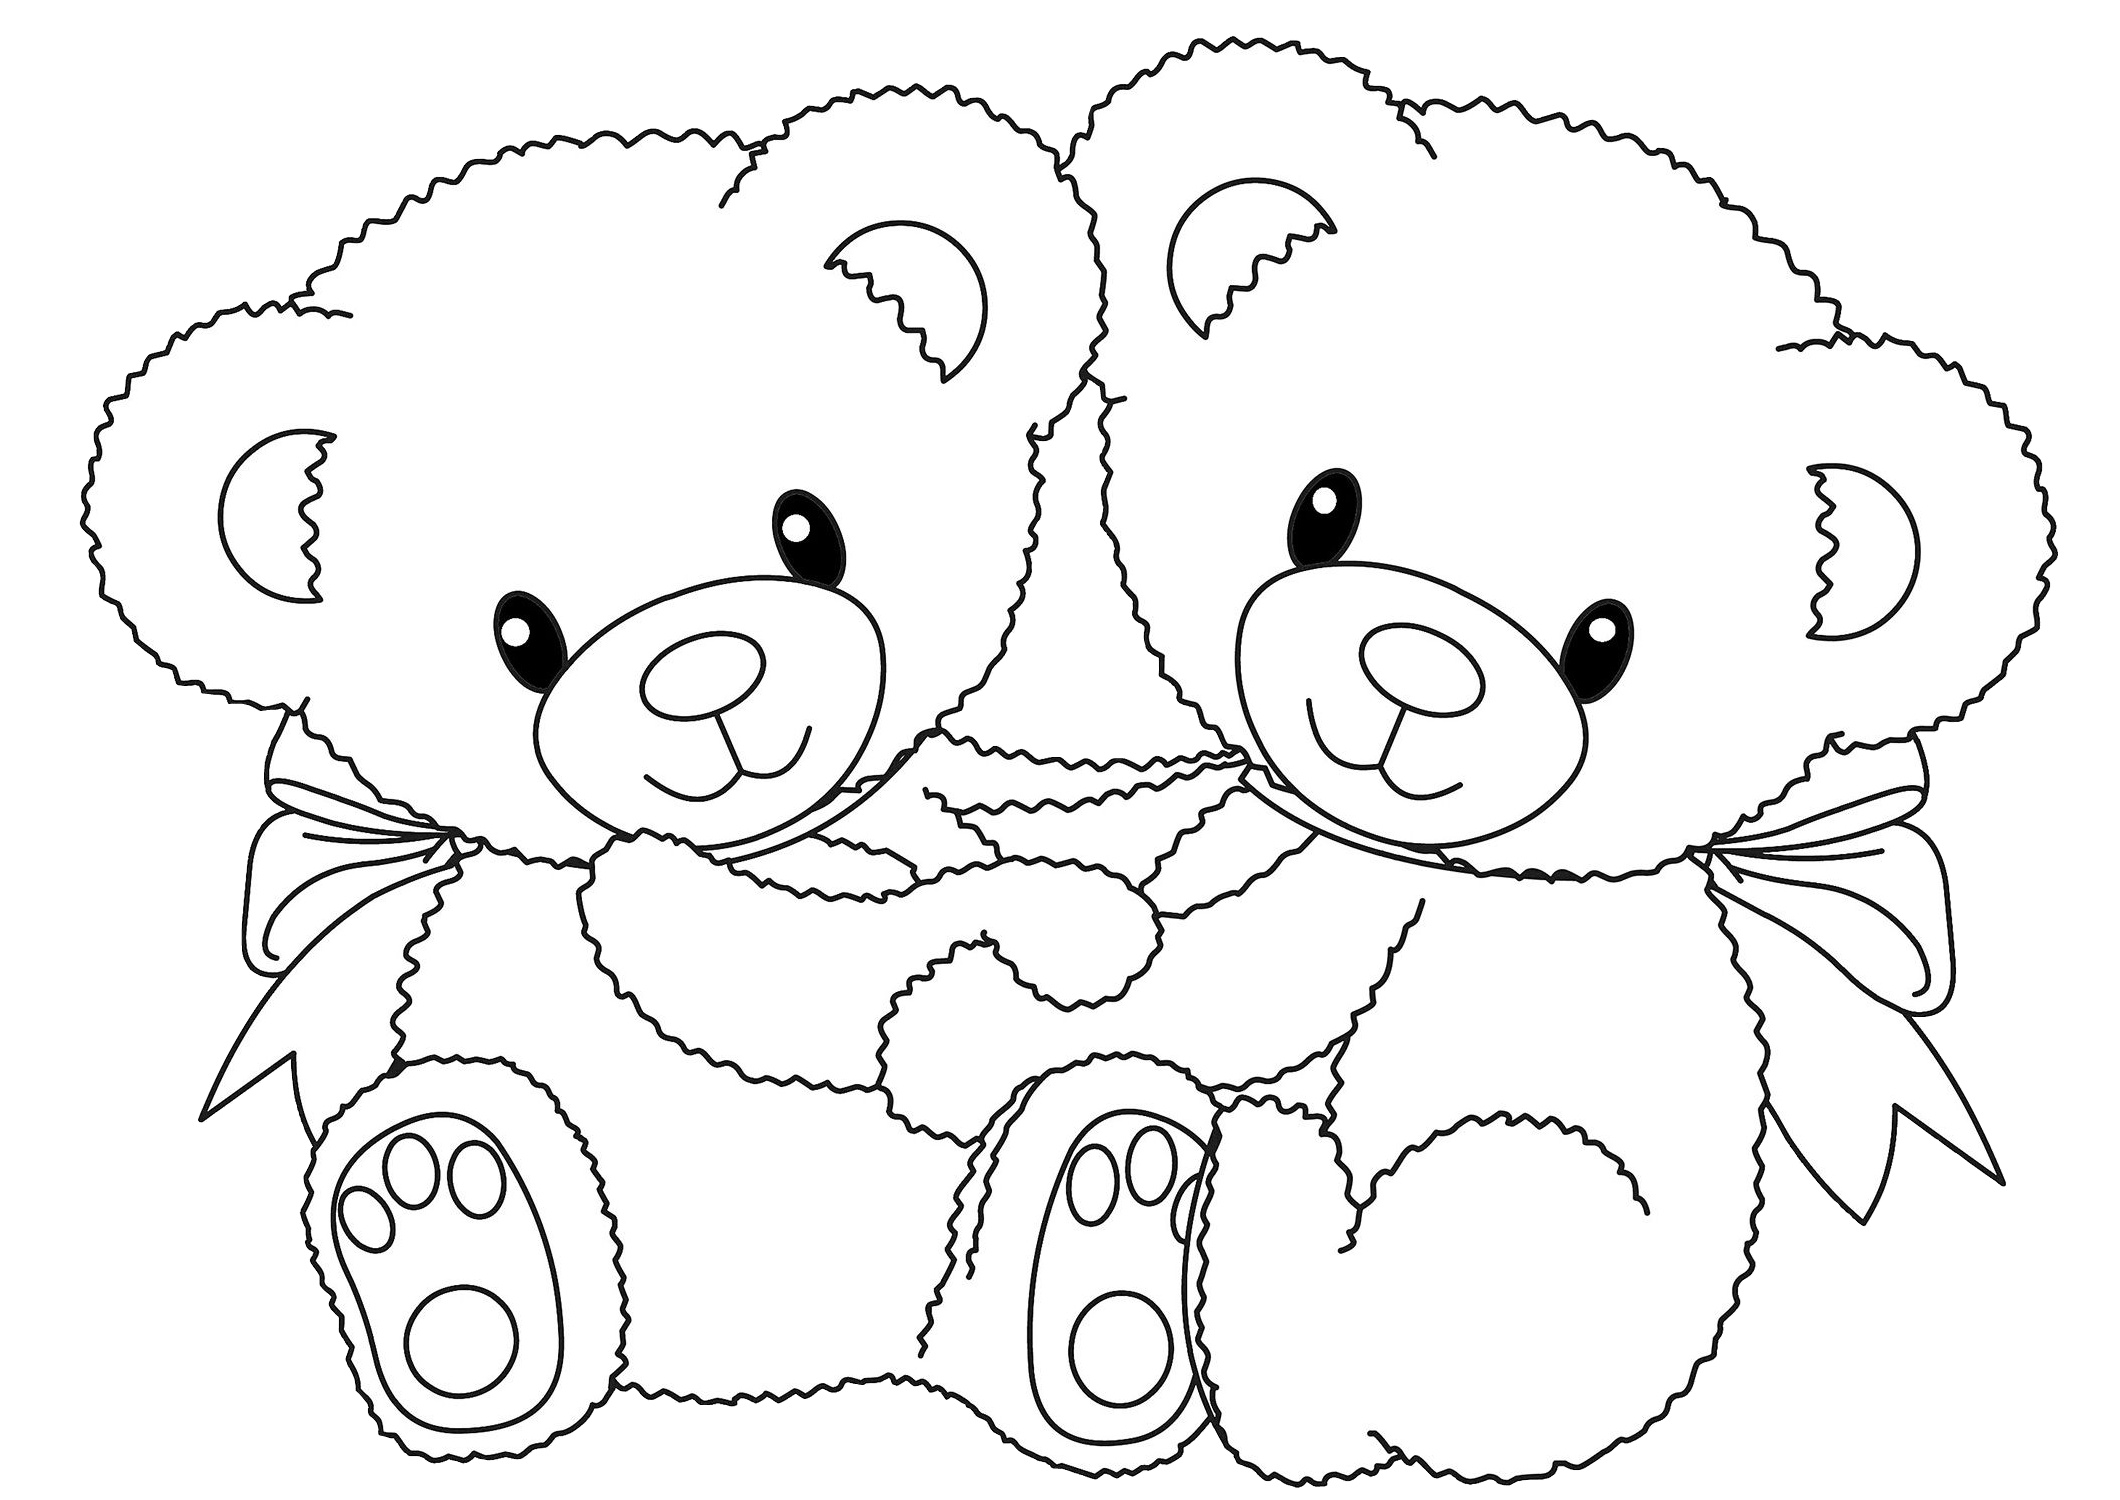 Cute Teddy Bear Coloring Sheet Outline Sketch Drawing - vrogue.co